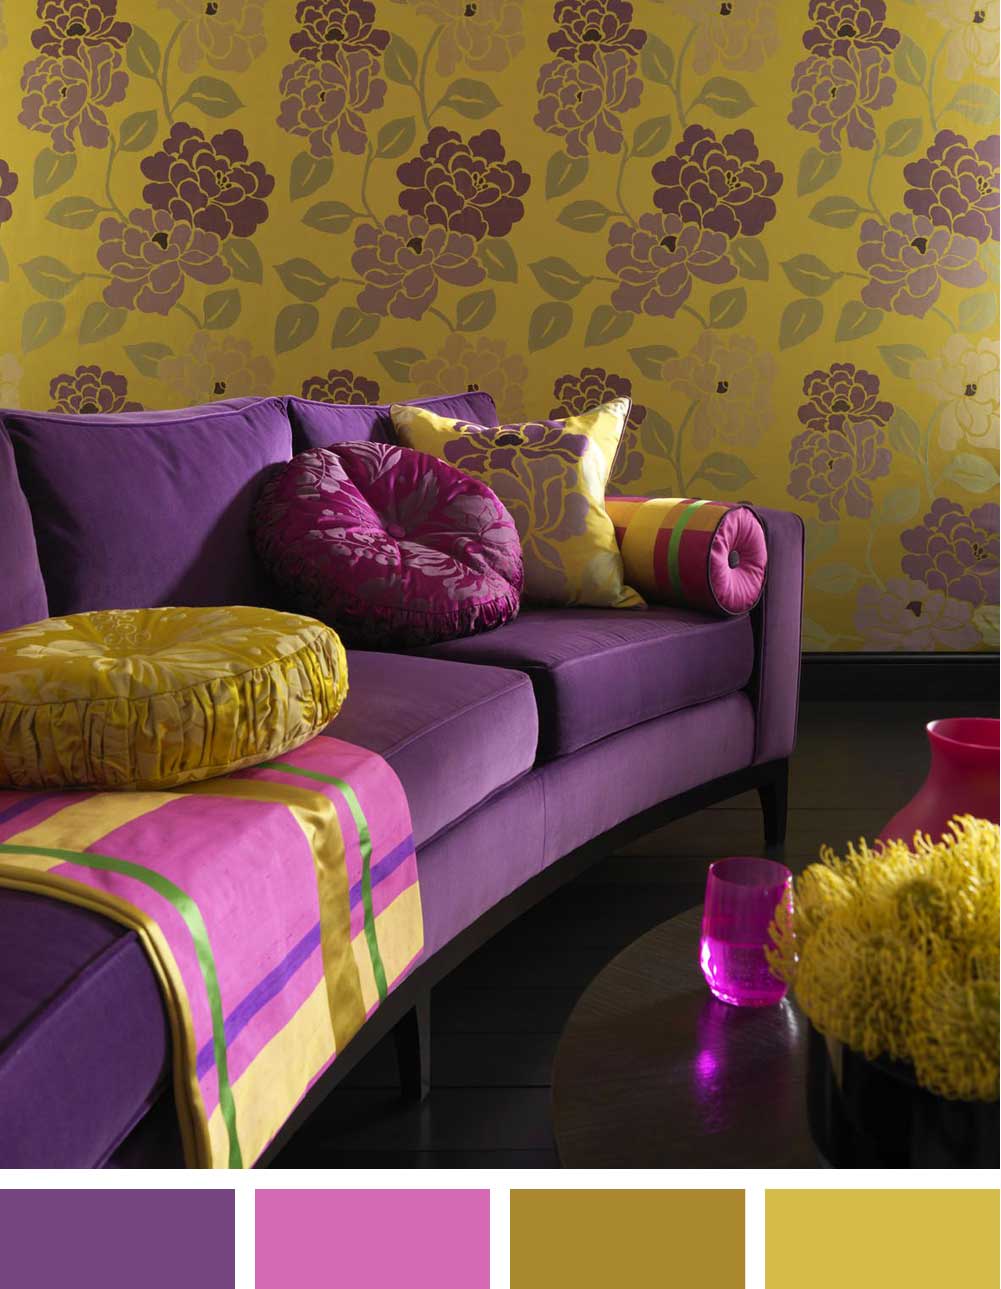 Green and Purple room